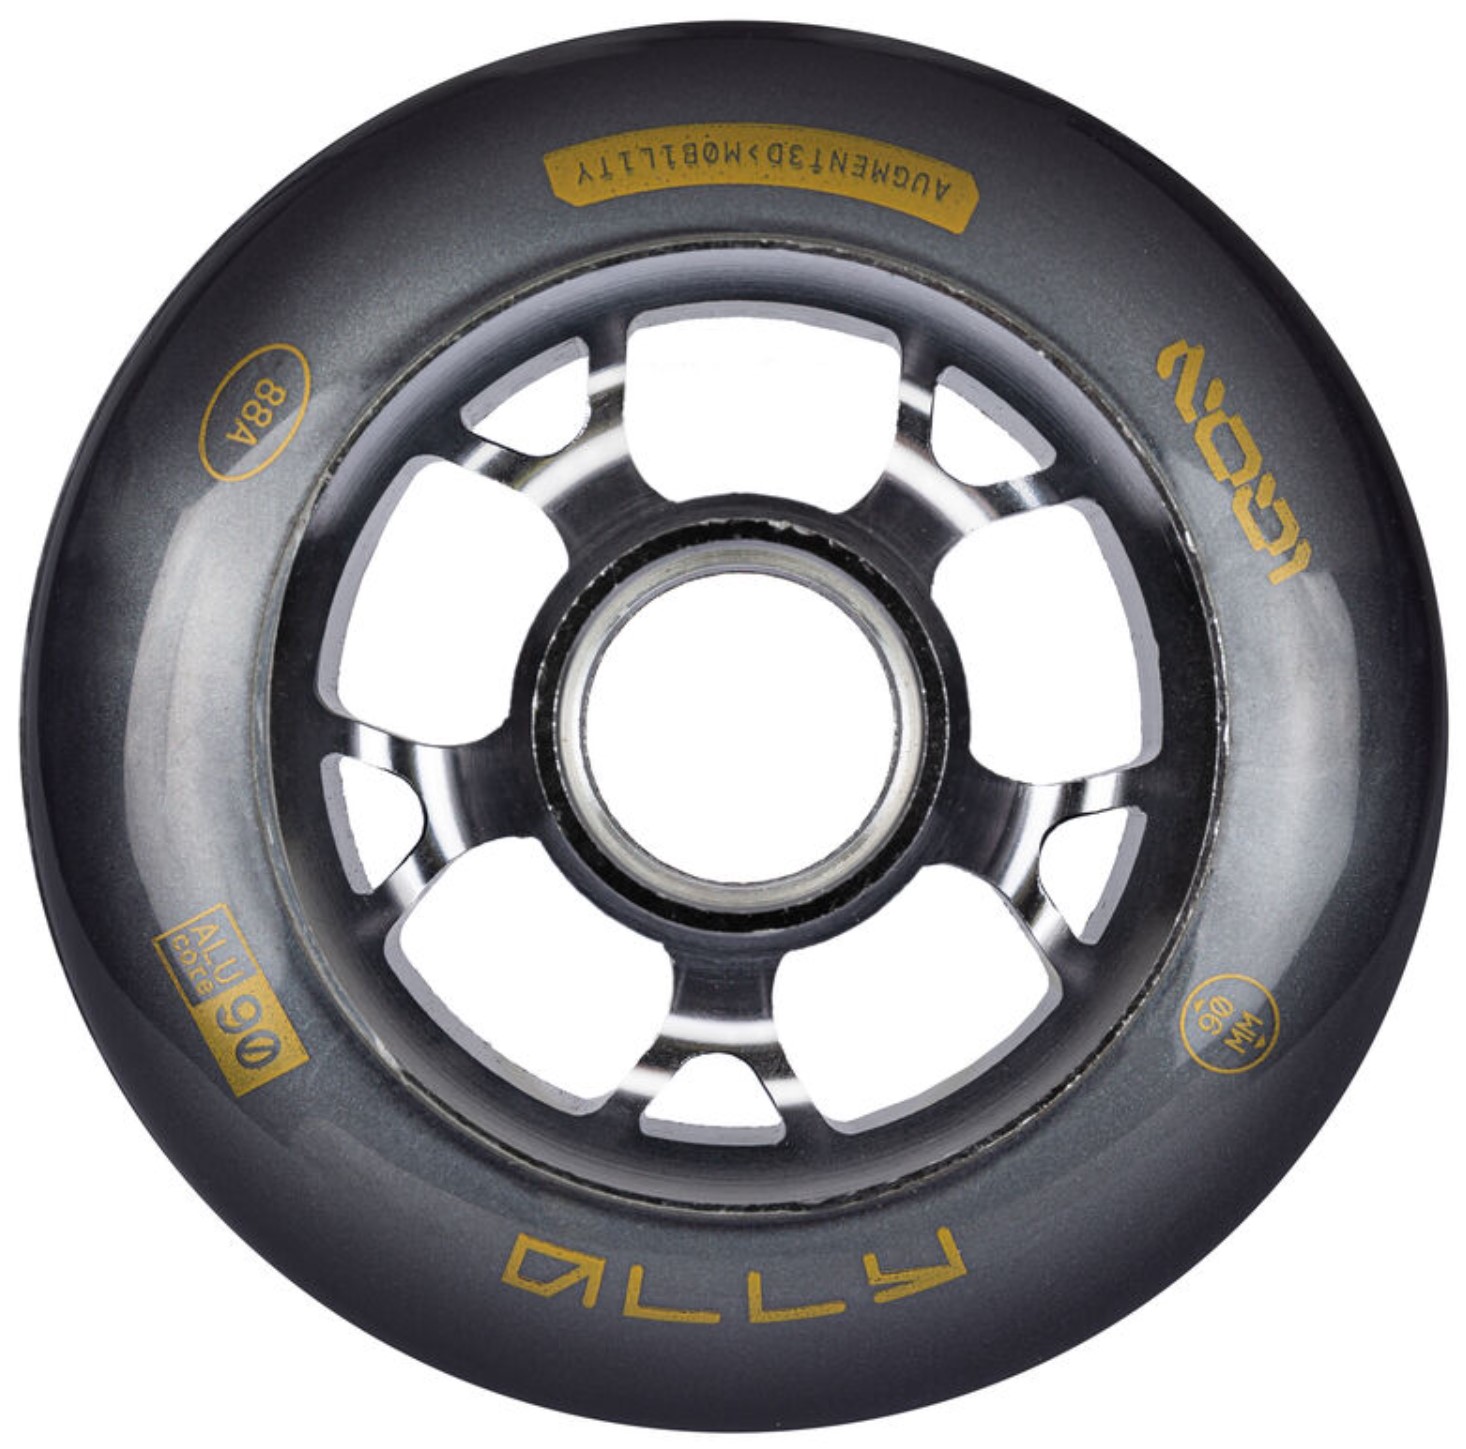 black IQON Ally wheel of 90 mm diameter and 88A durometer with an aluminium core